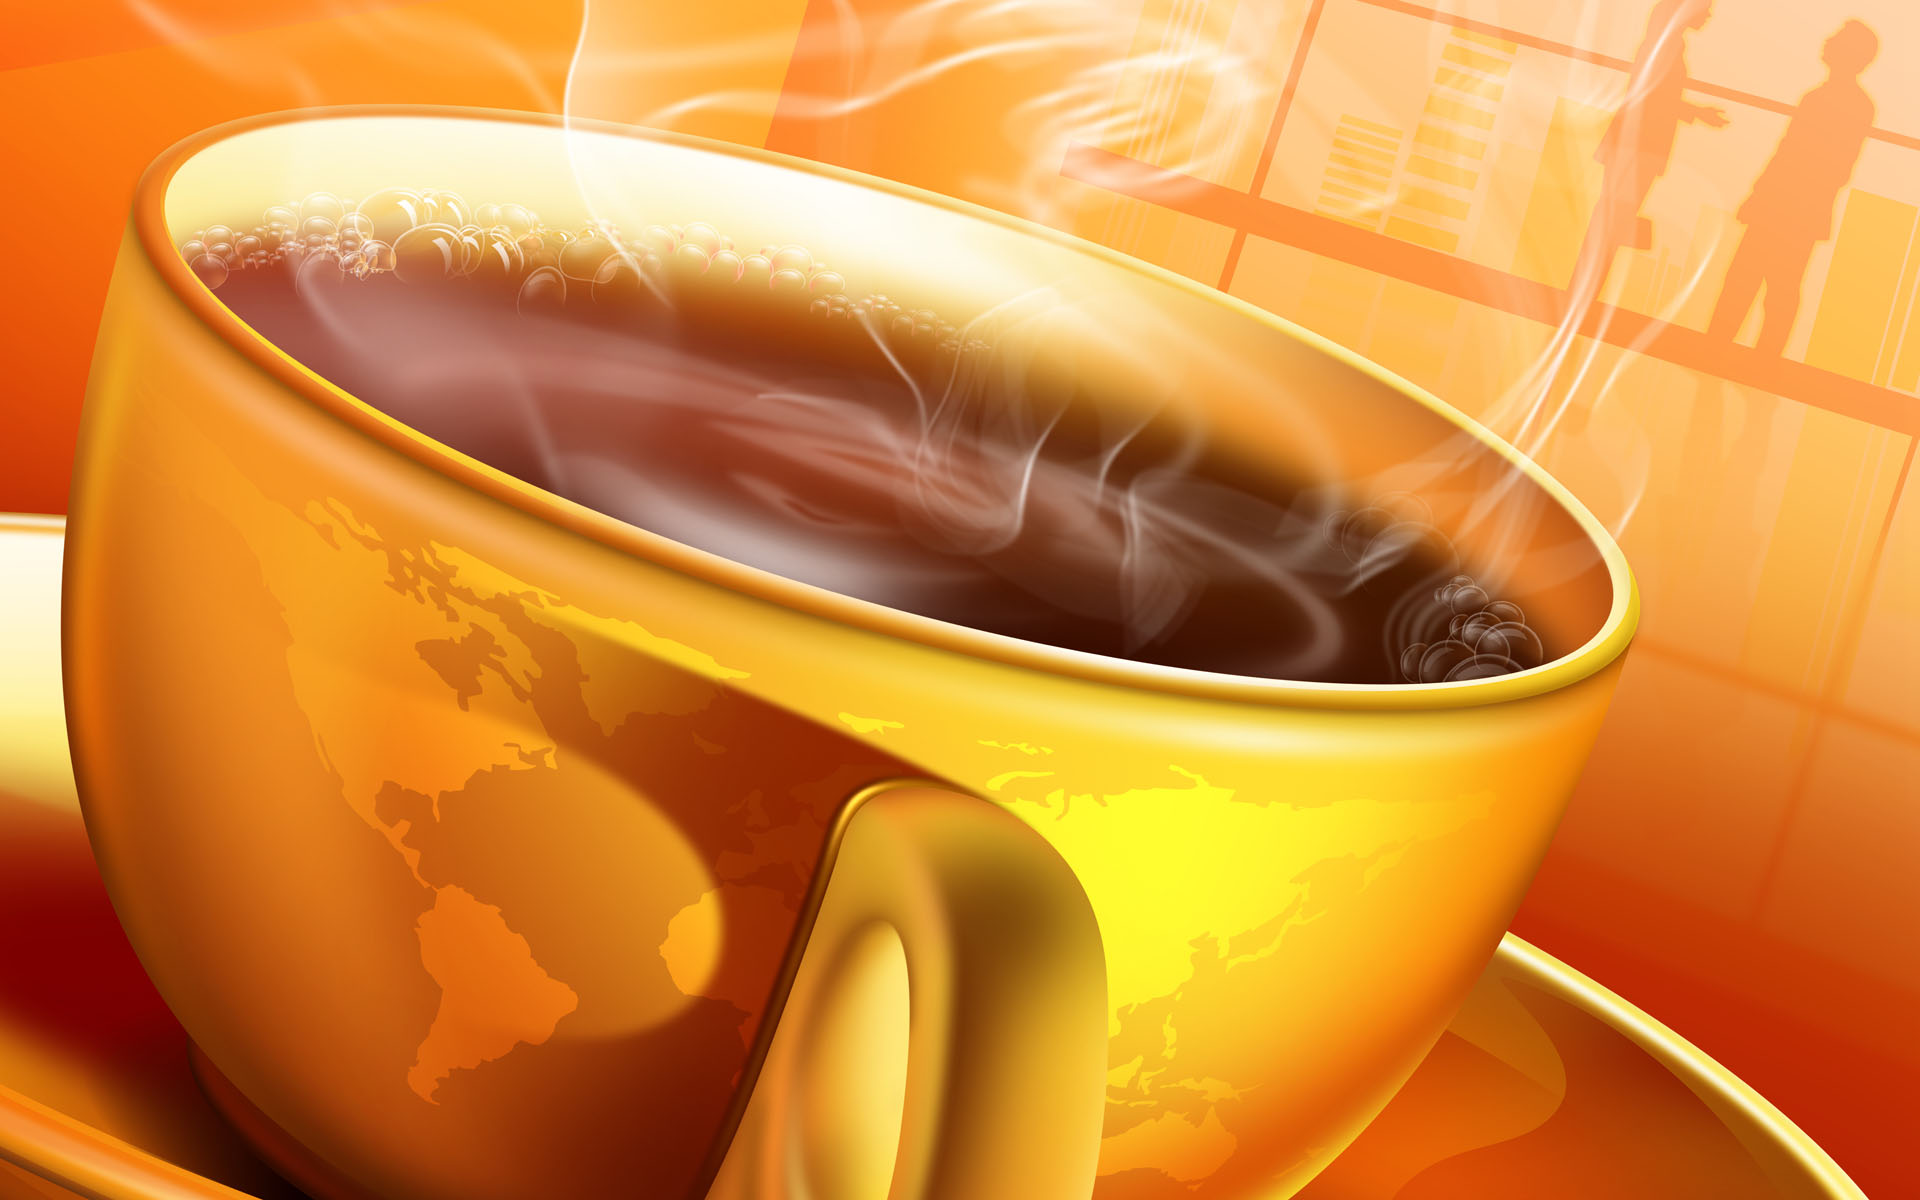 Steaming coffee in a world map-themed cup against an orange background for an HD desktop wallpaper.